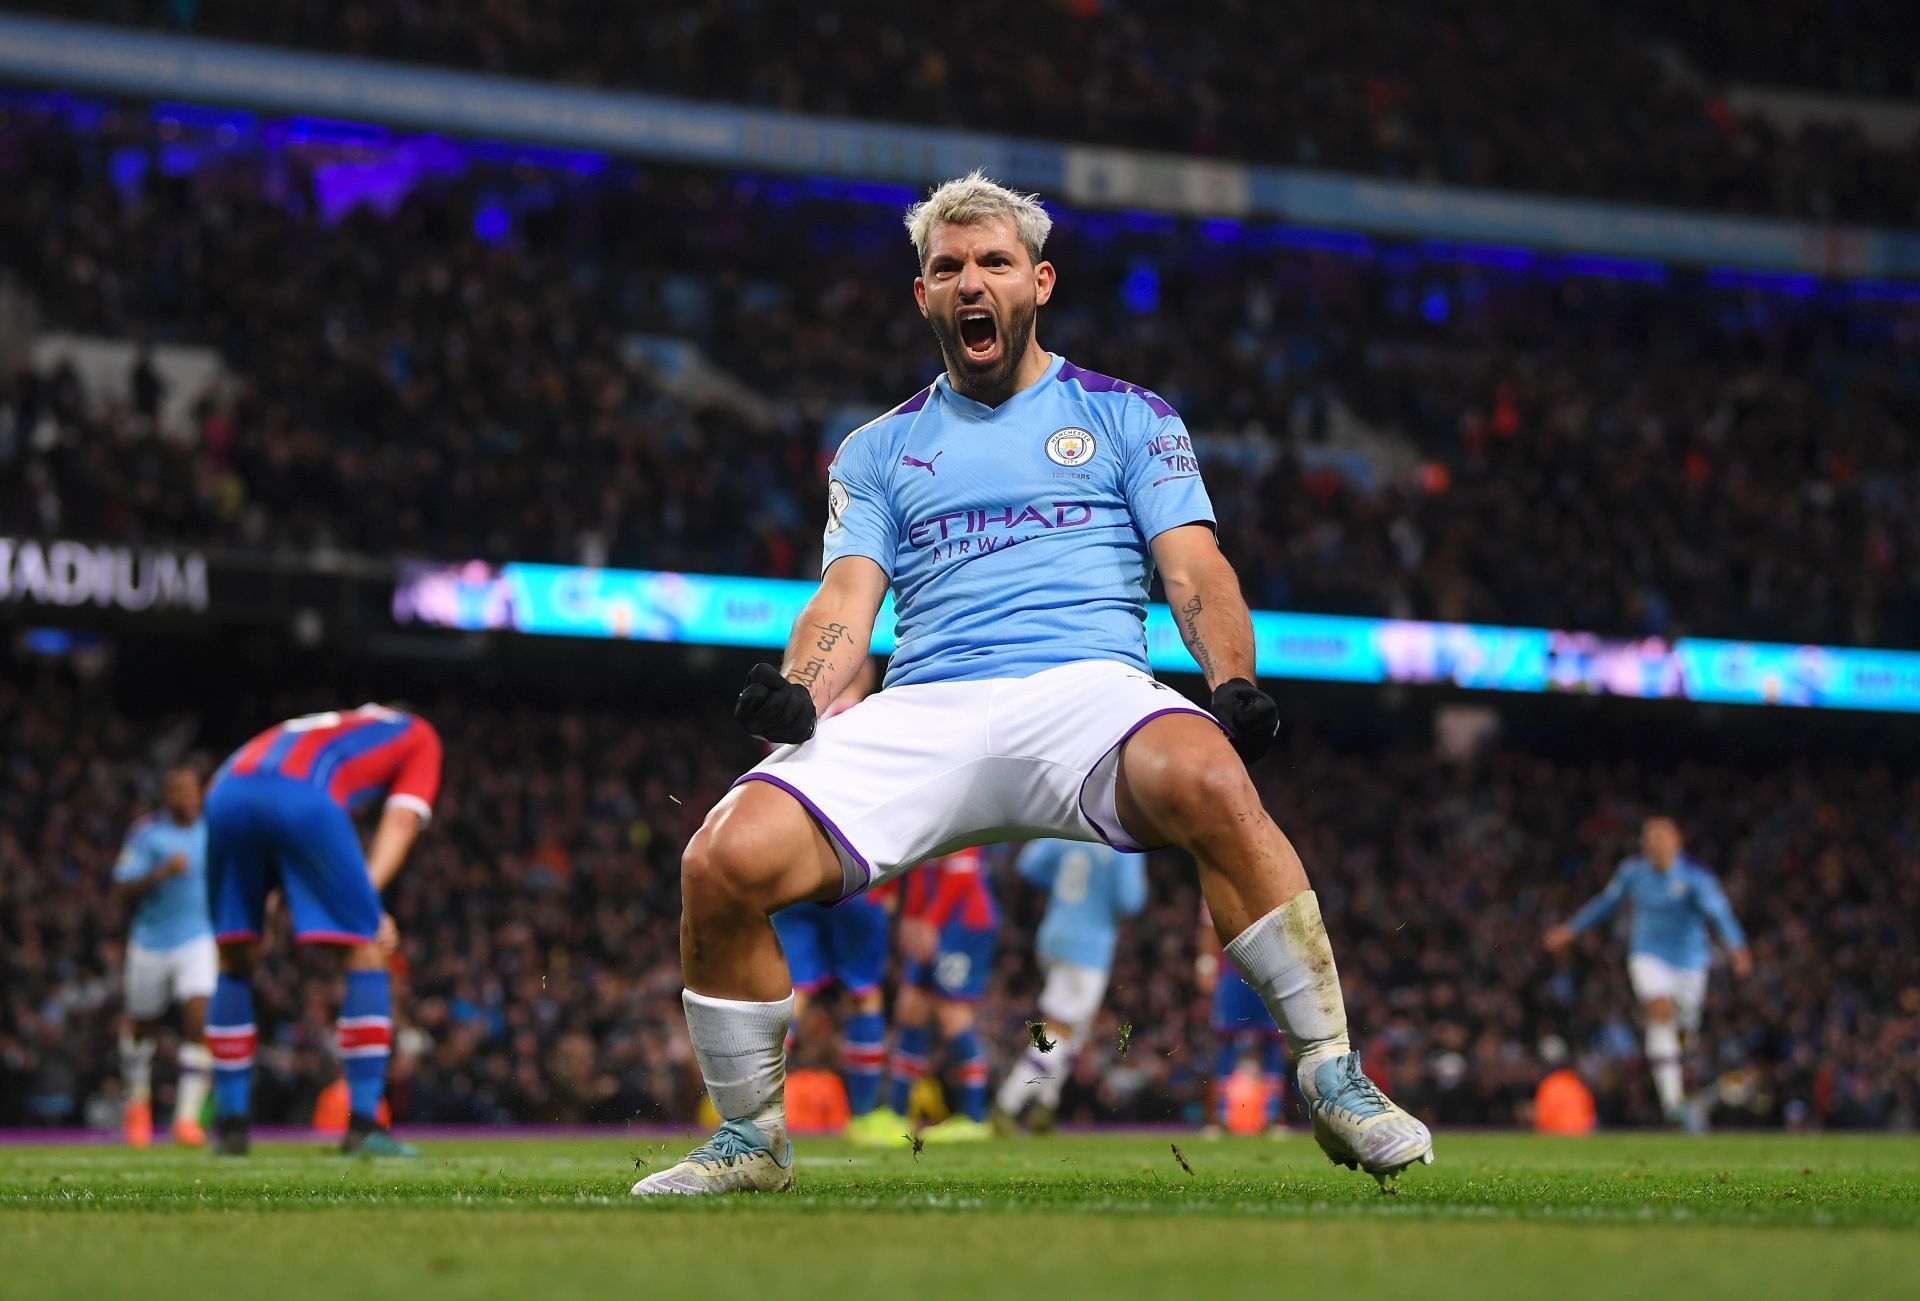 Sergio Aguero enjoyed an excellent spell with Manchester City in the English Premier League